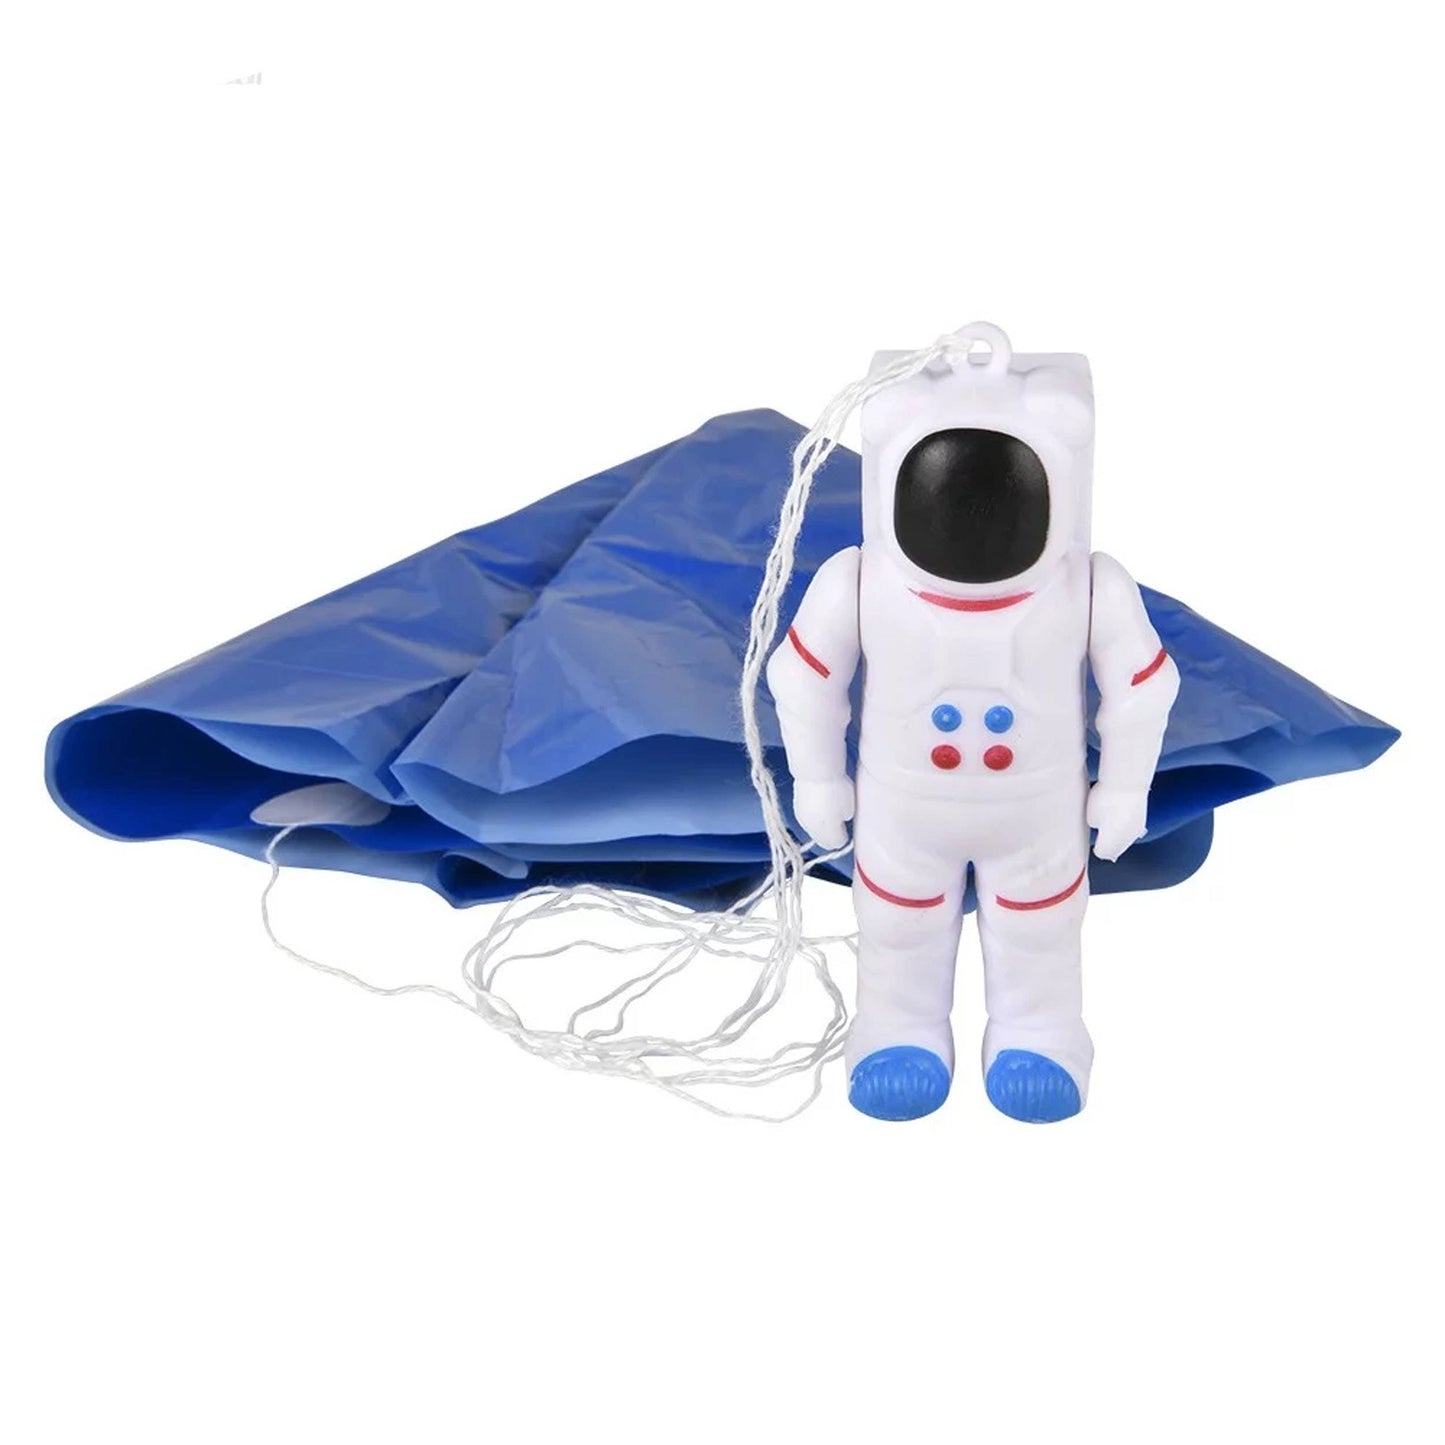 New Astronaut Paratropper Toy For Kids & Toddlers